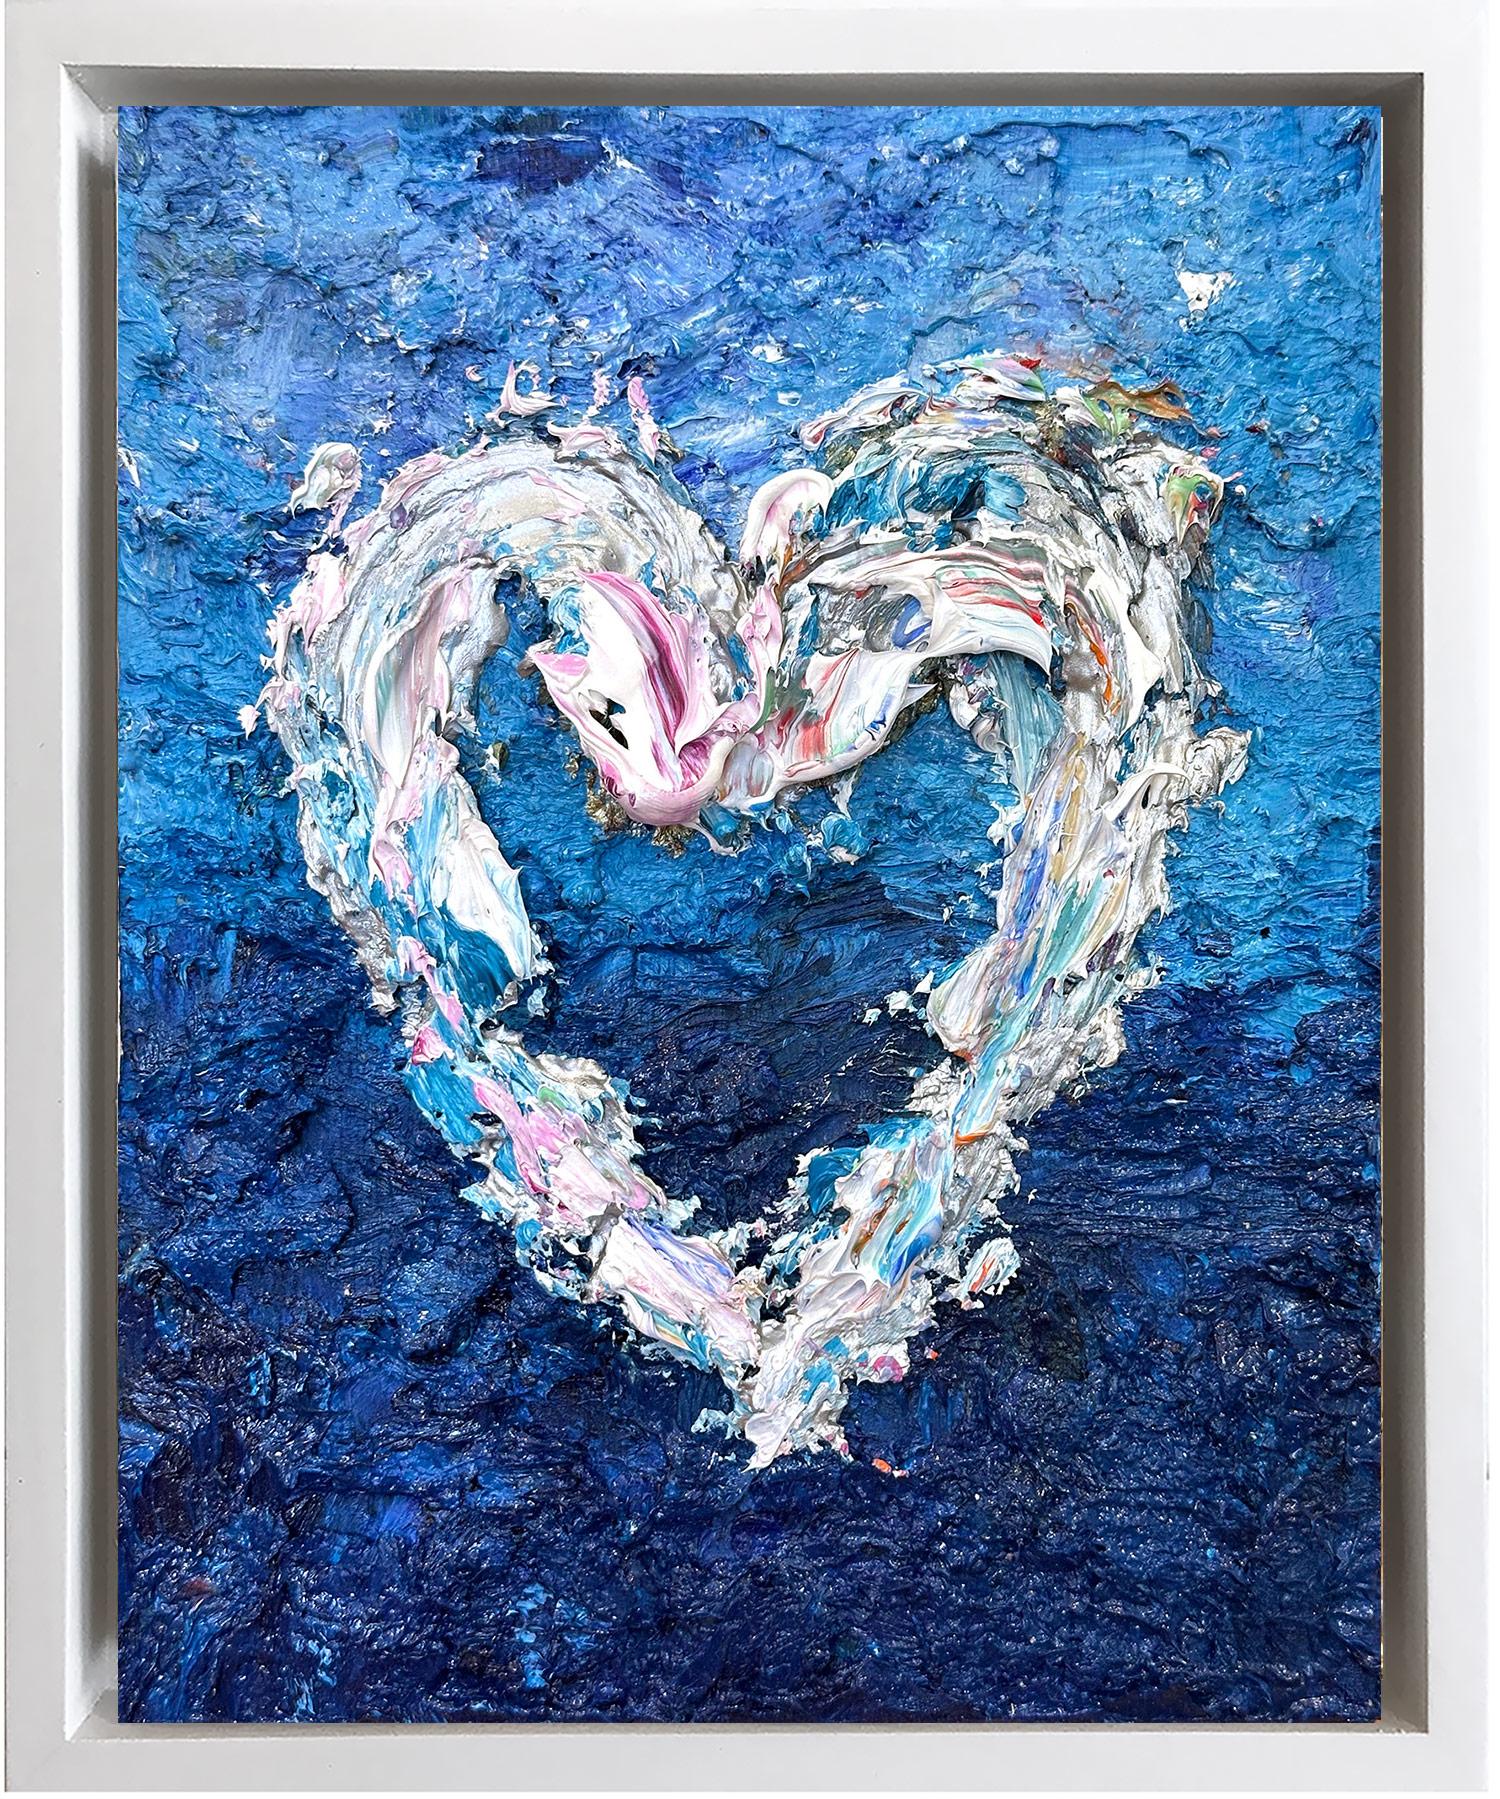 Cindy Shaoul Figurative Painting - "My Gucci Blue Heart" Contemporary Oil Painting on Wood with White Floater Frame